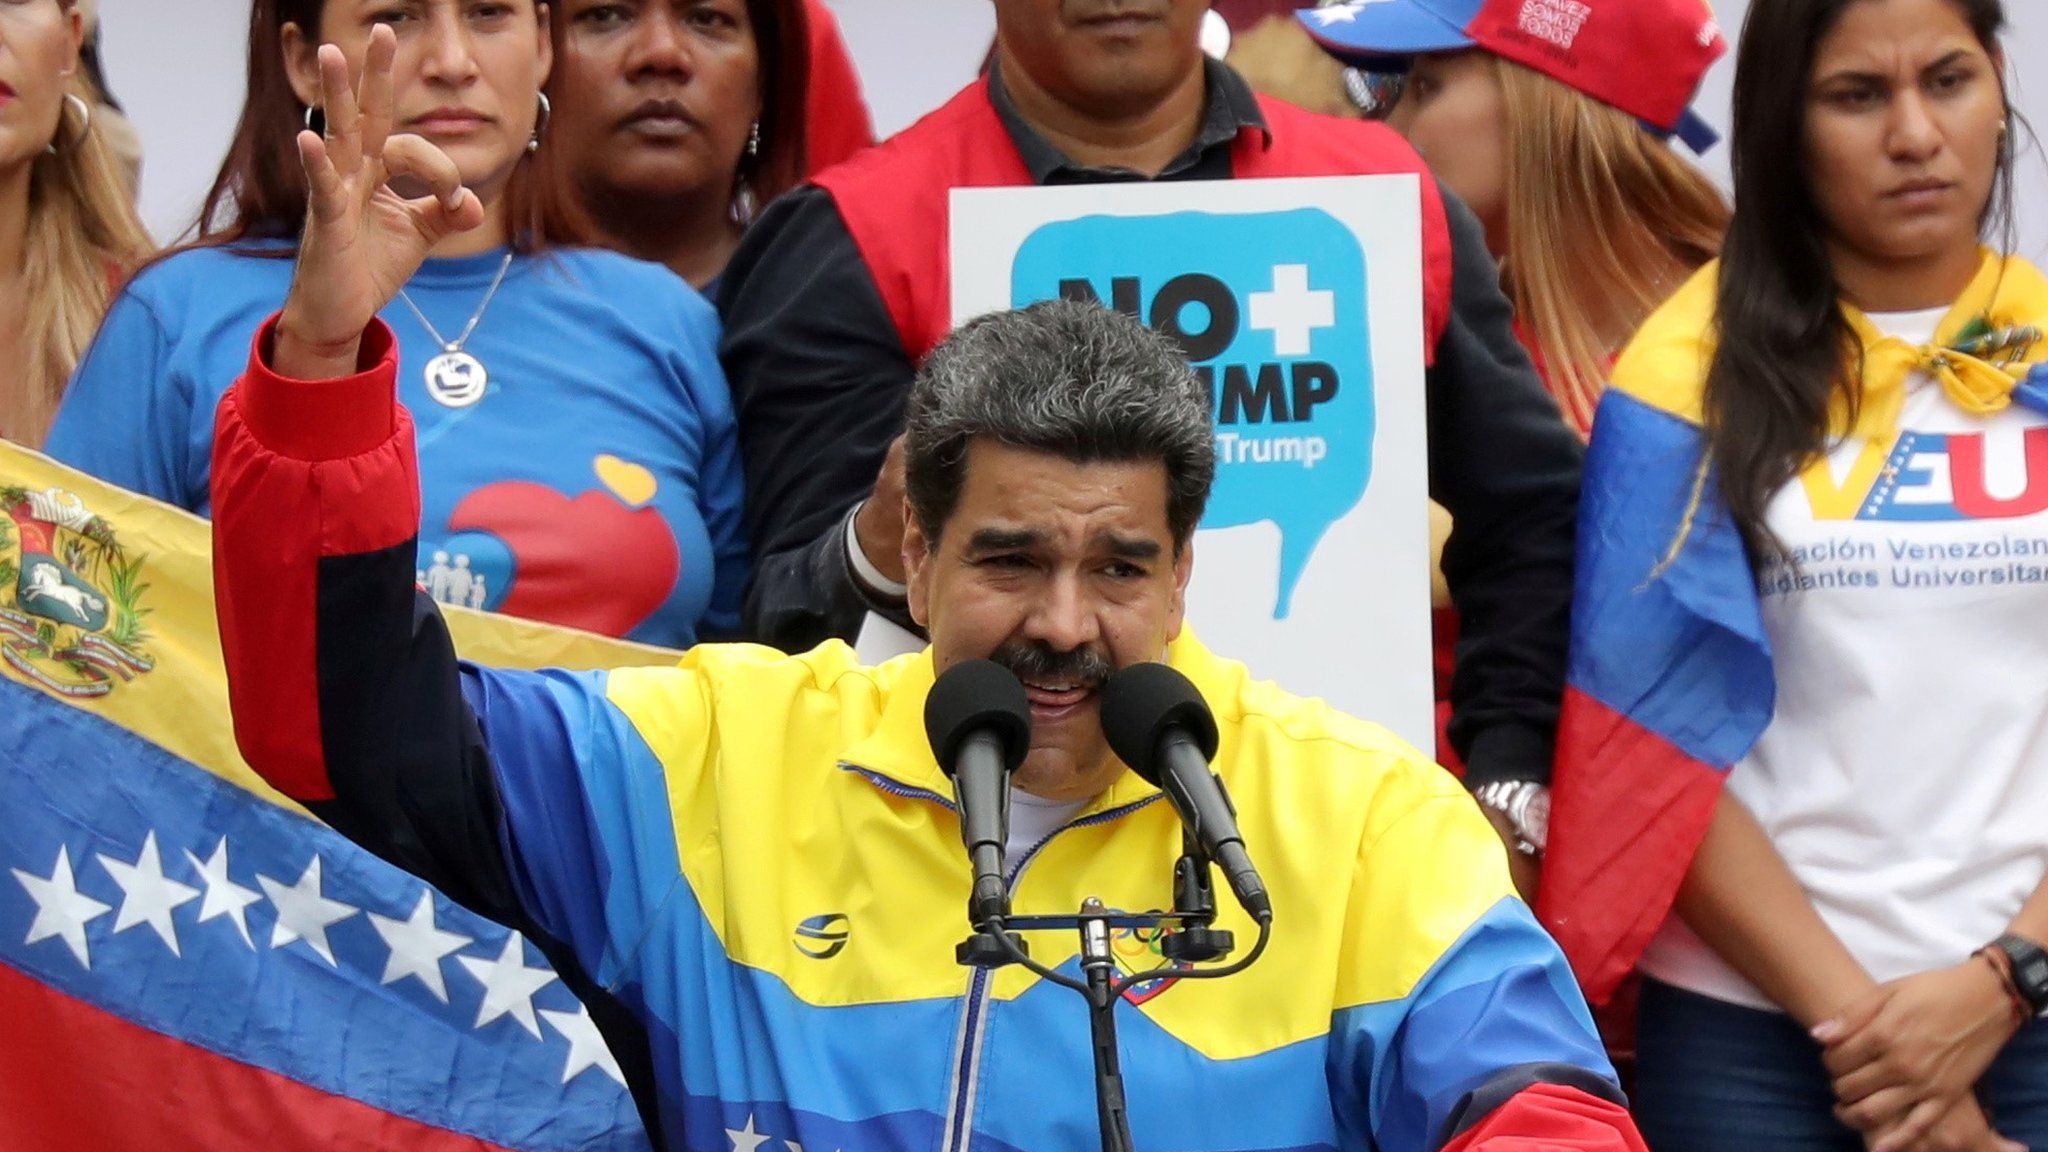 Venezuela's President Nicolas Maduro takes part in a rally against the US sanctions on Venezuela, in Caracas on 19 September